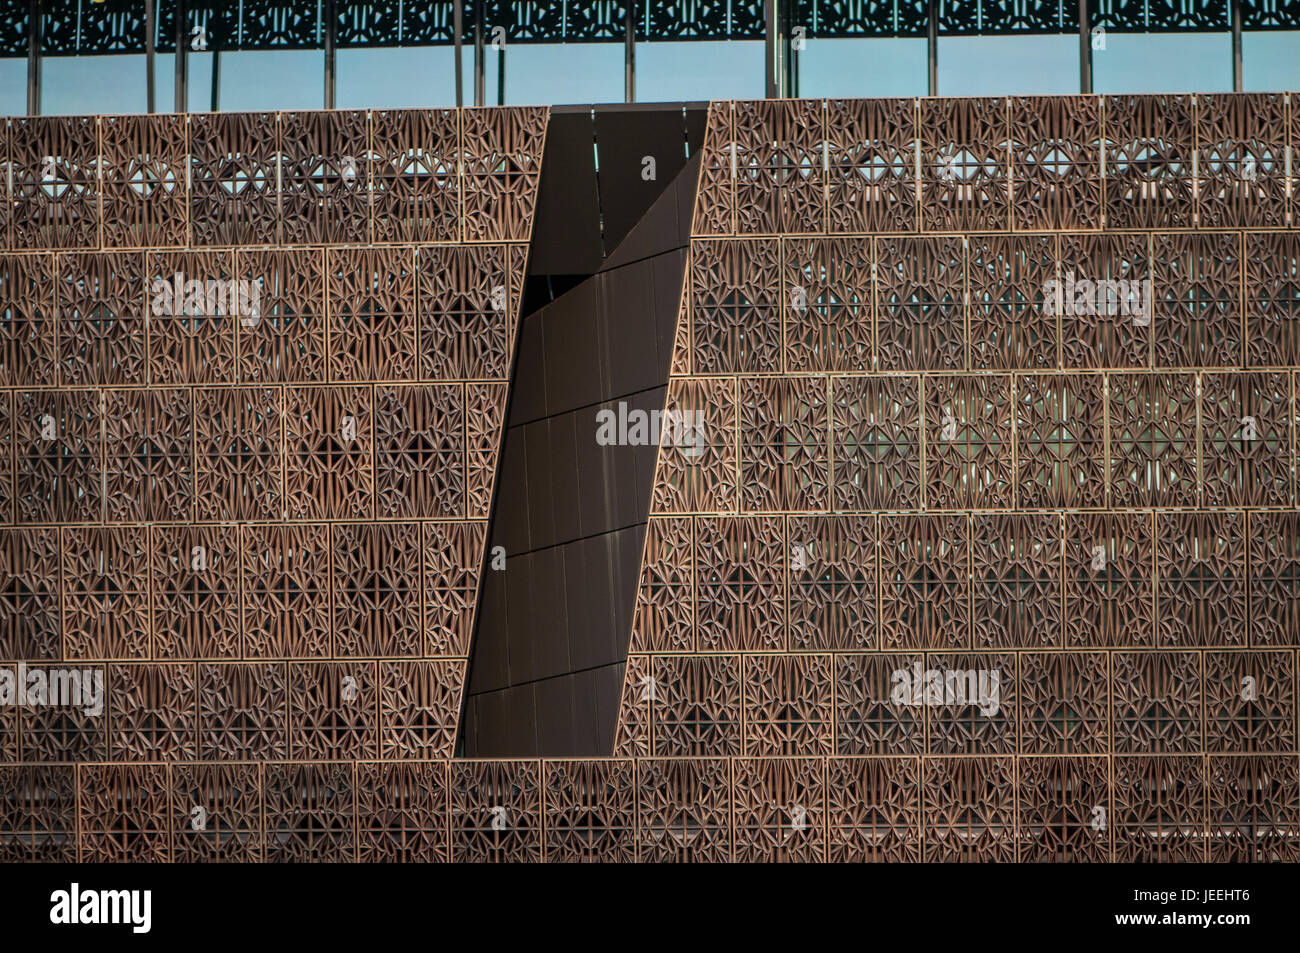 ARTWORK ON FACADE OF THE AFRICAN AMERICAN MUSEUM, NATIONAL MALL, WASHINGTON D.C. Stock Photo